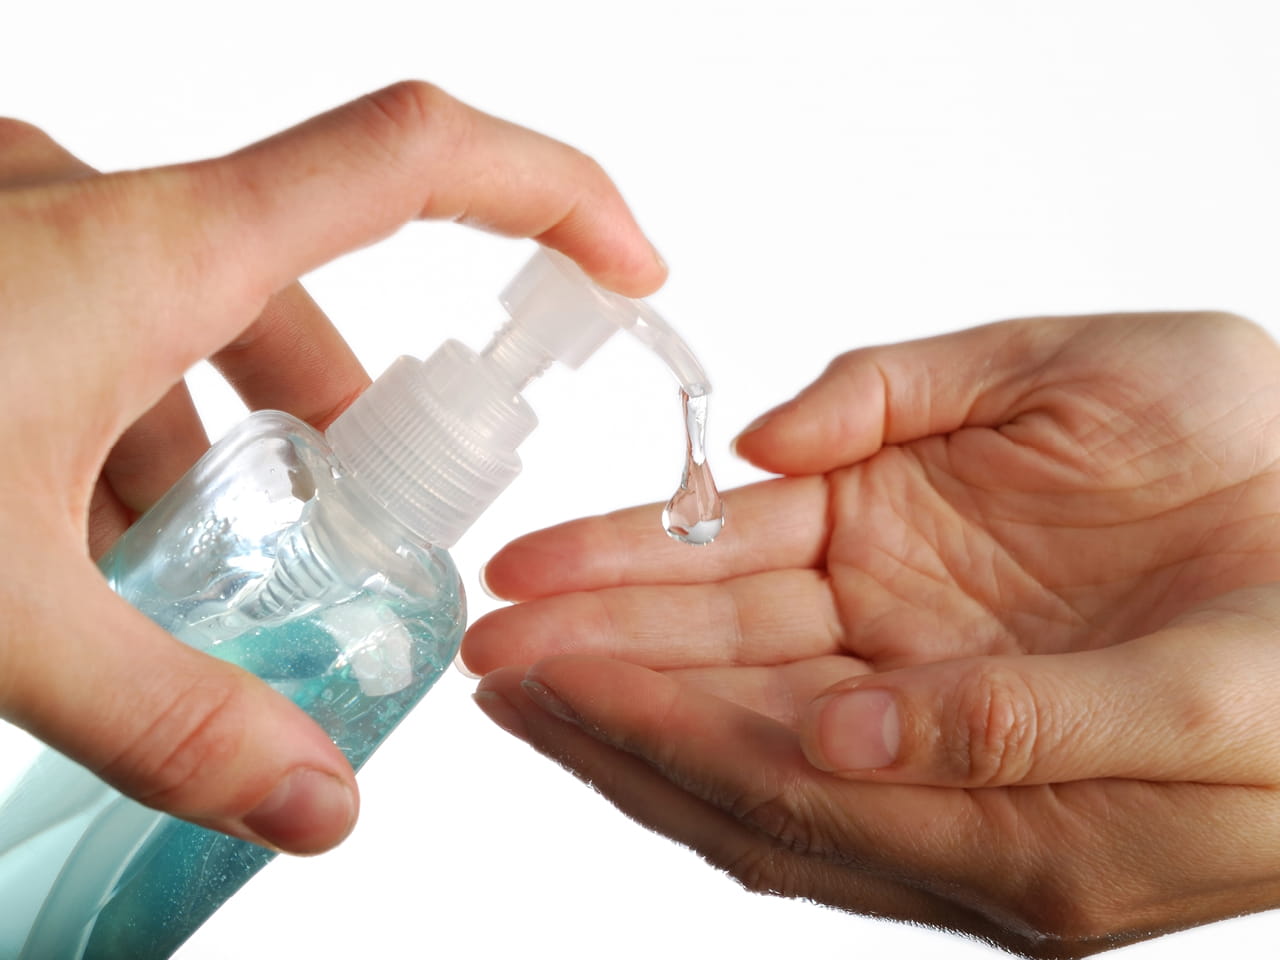 Do Hand Sanitizers Require A Drug License To Be Sold In Stores?